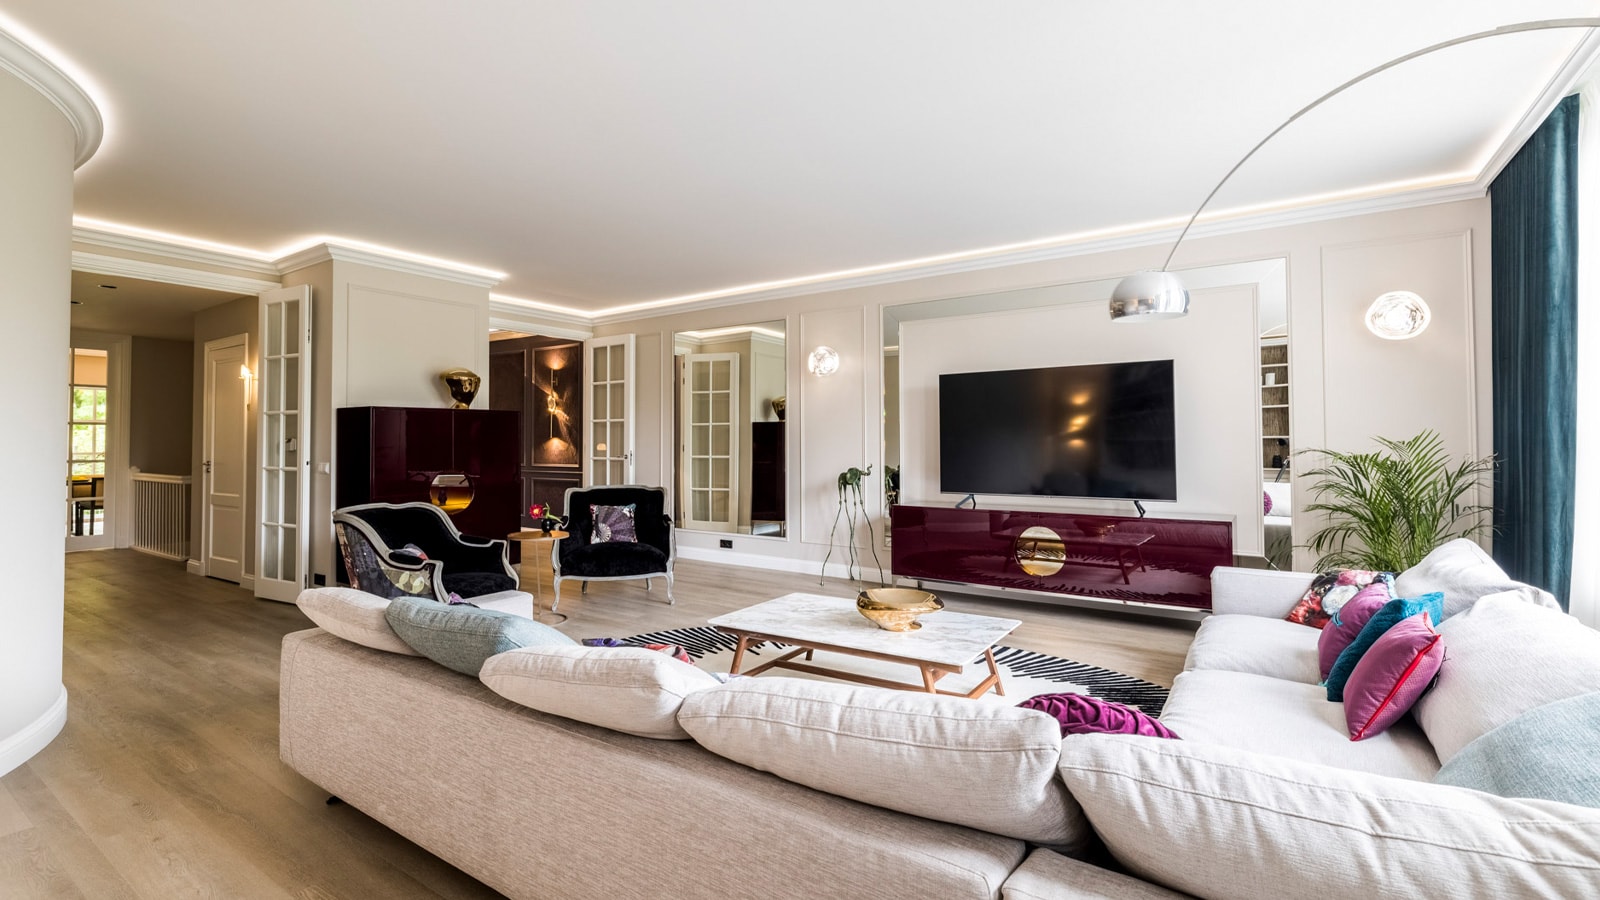 Aqua Marina Museumplein, an apartment with diverse room schemes in the heart of Amsterdam